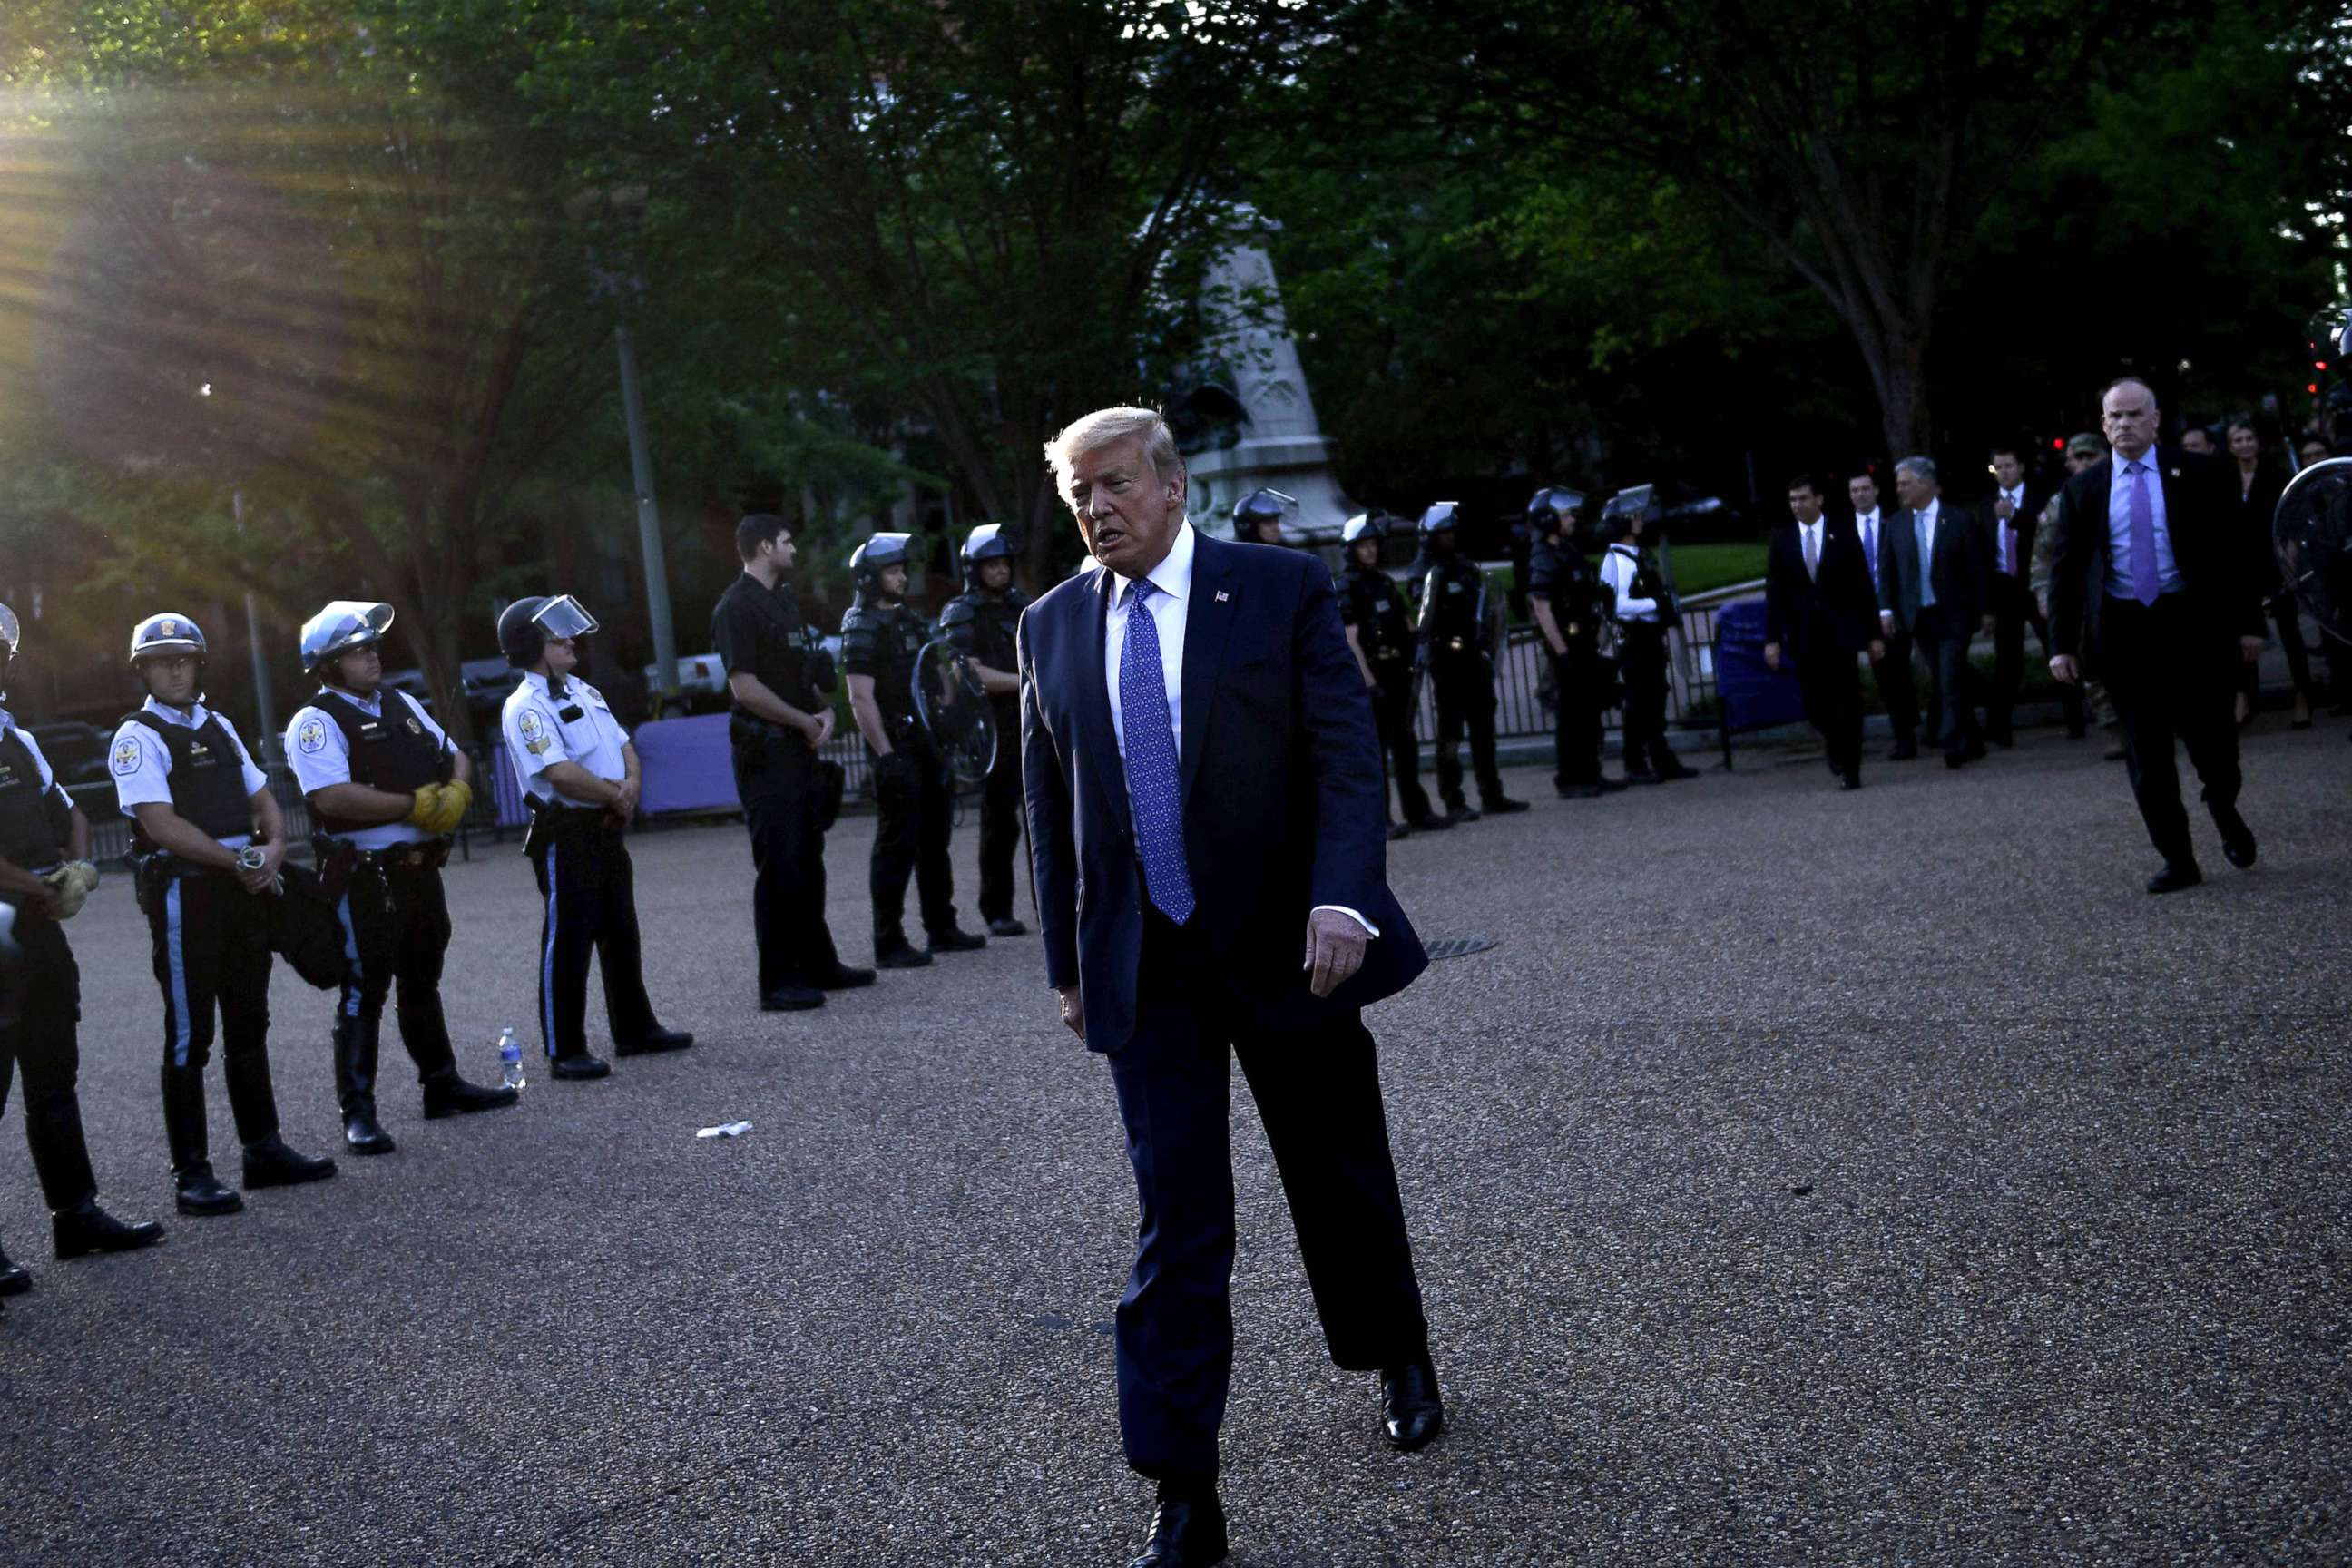 PHOTO: President Donald Trump walks back to the White House escorted by the Secret Service after appearing outside of St John's Episcopal church across Lafayette Park in Washington, D.C. on June 1, 2020.